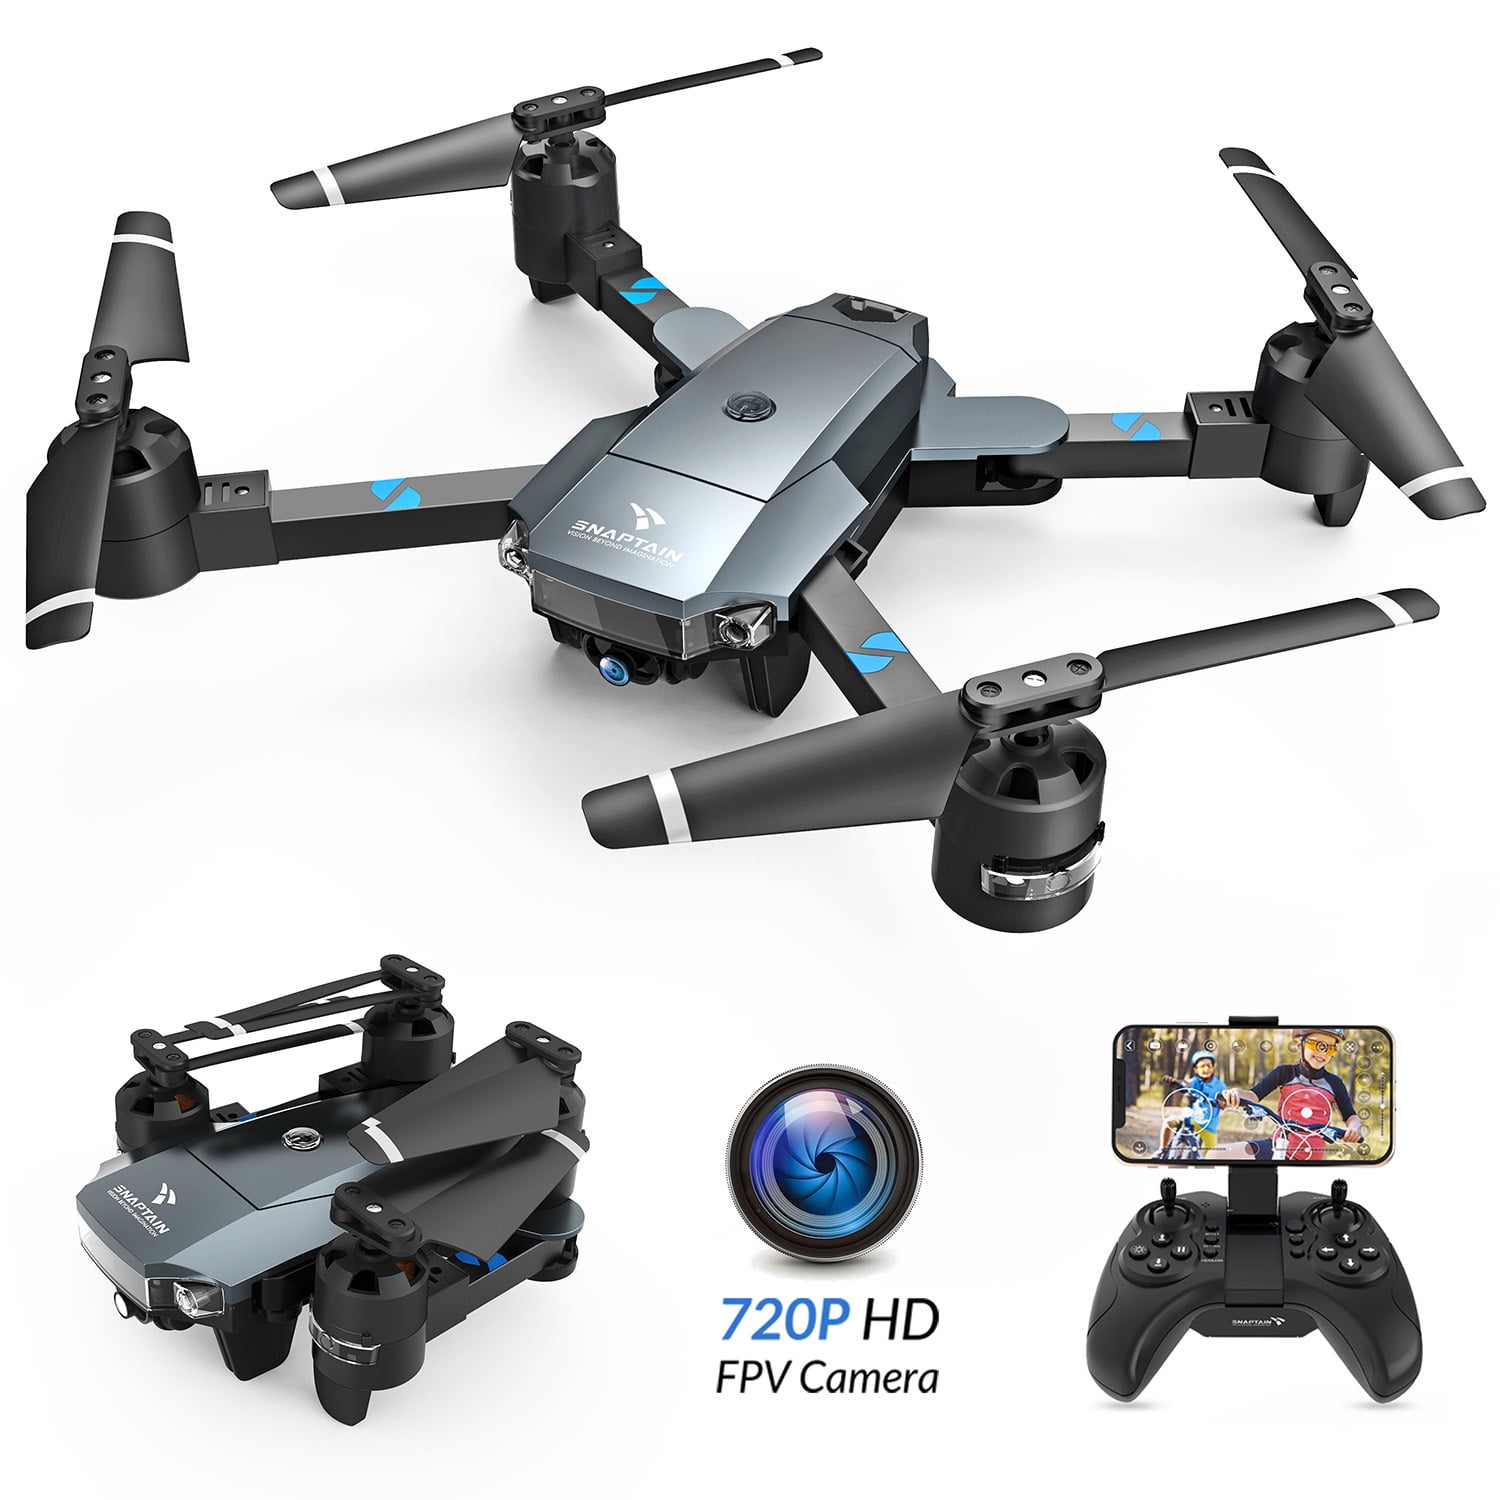 SNAPTAIN S5C WiFi FPV Drone RC Quadcopter 720P Video Camera 3D View Mode Toys 